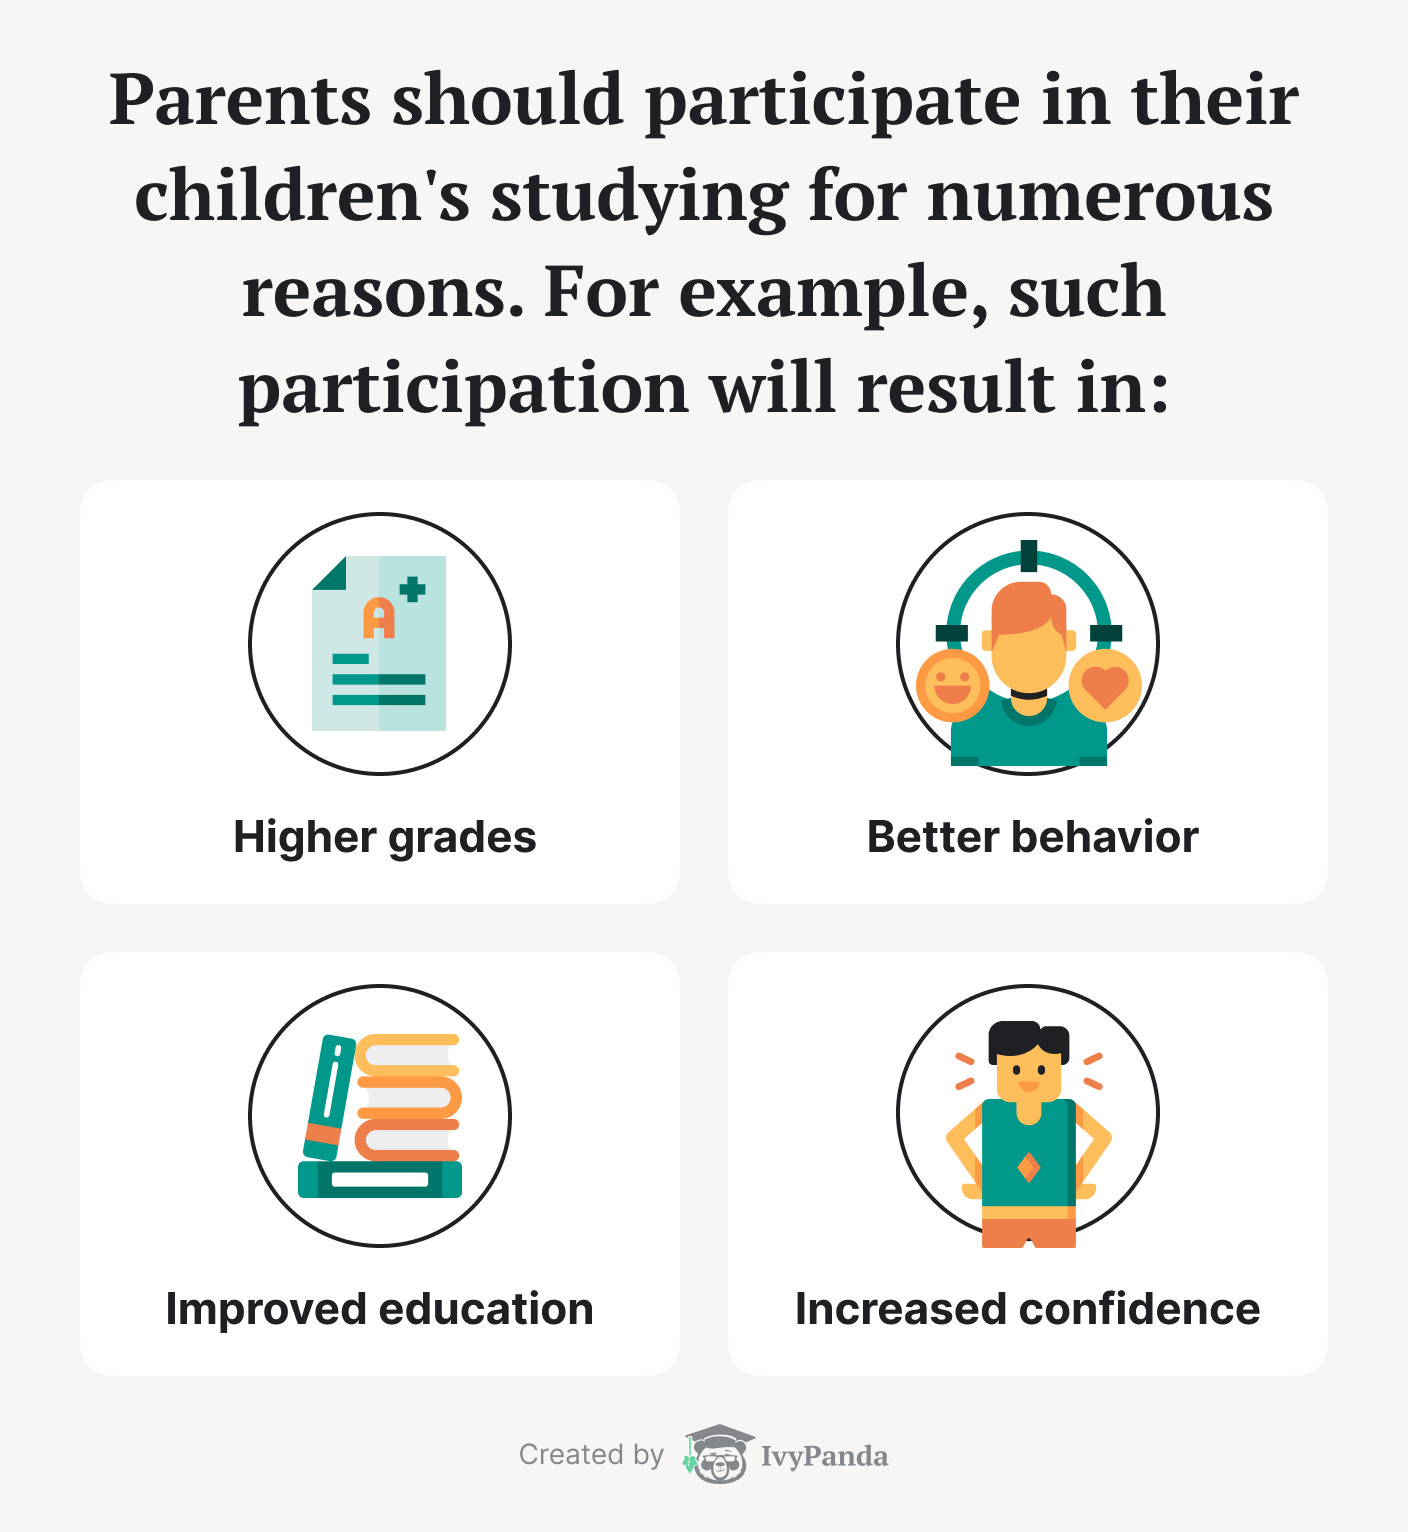 Parents should participate in their children's studying for numerous reasons.